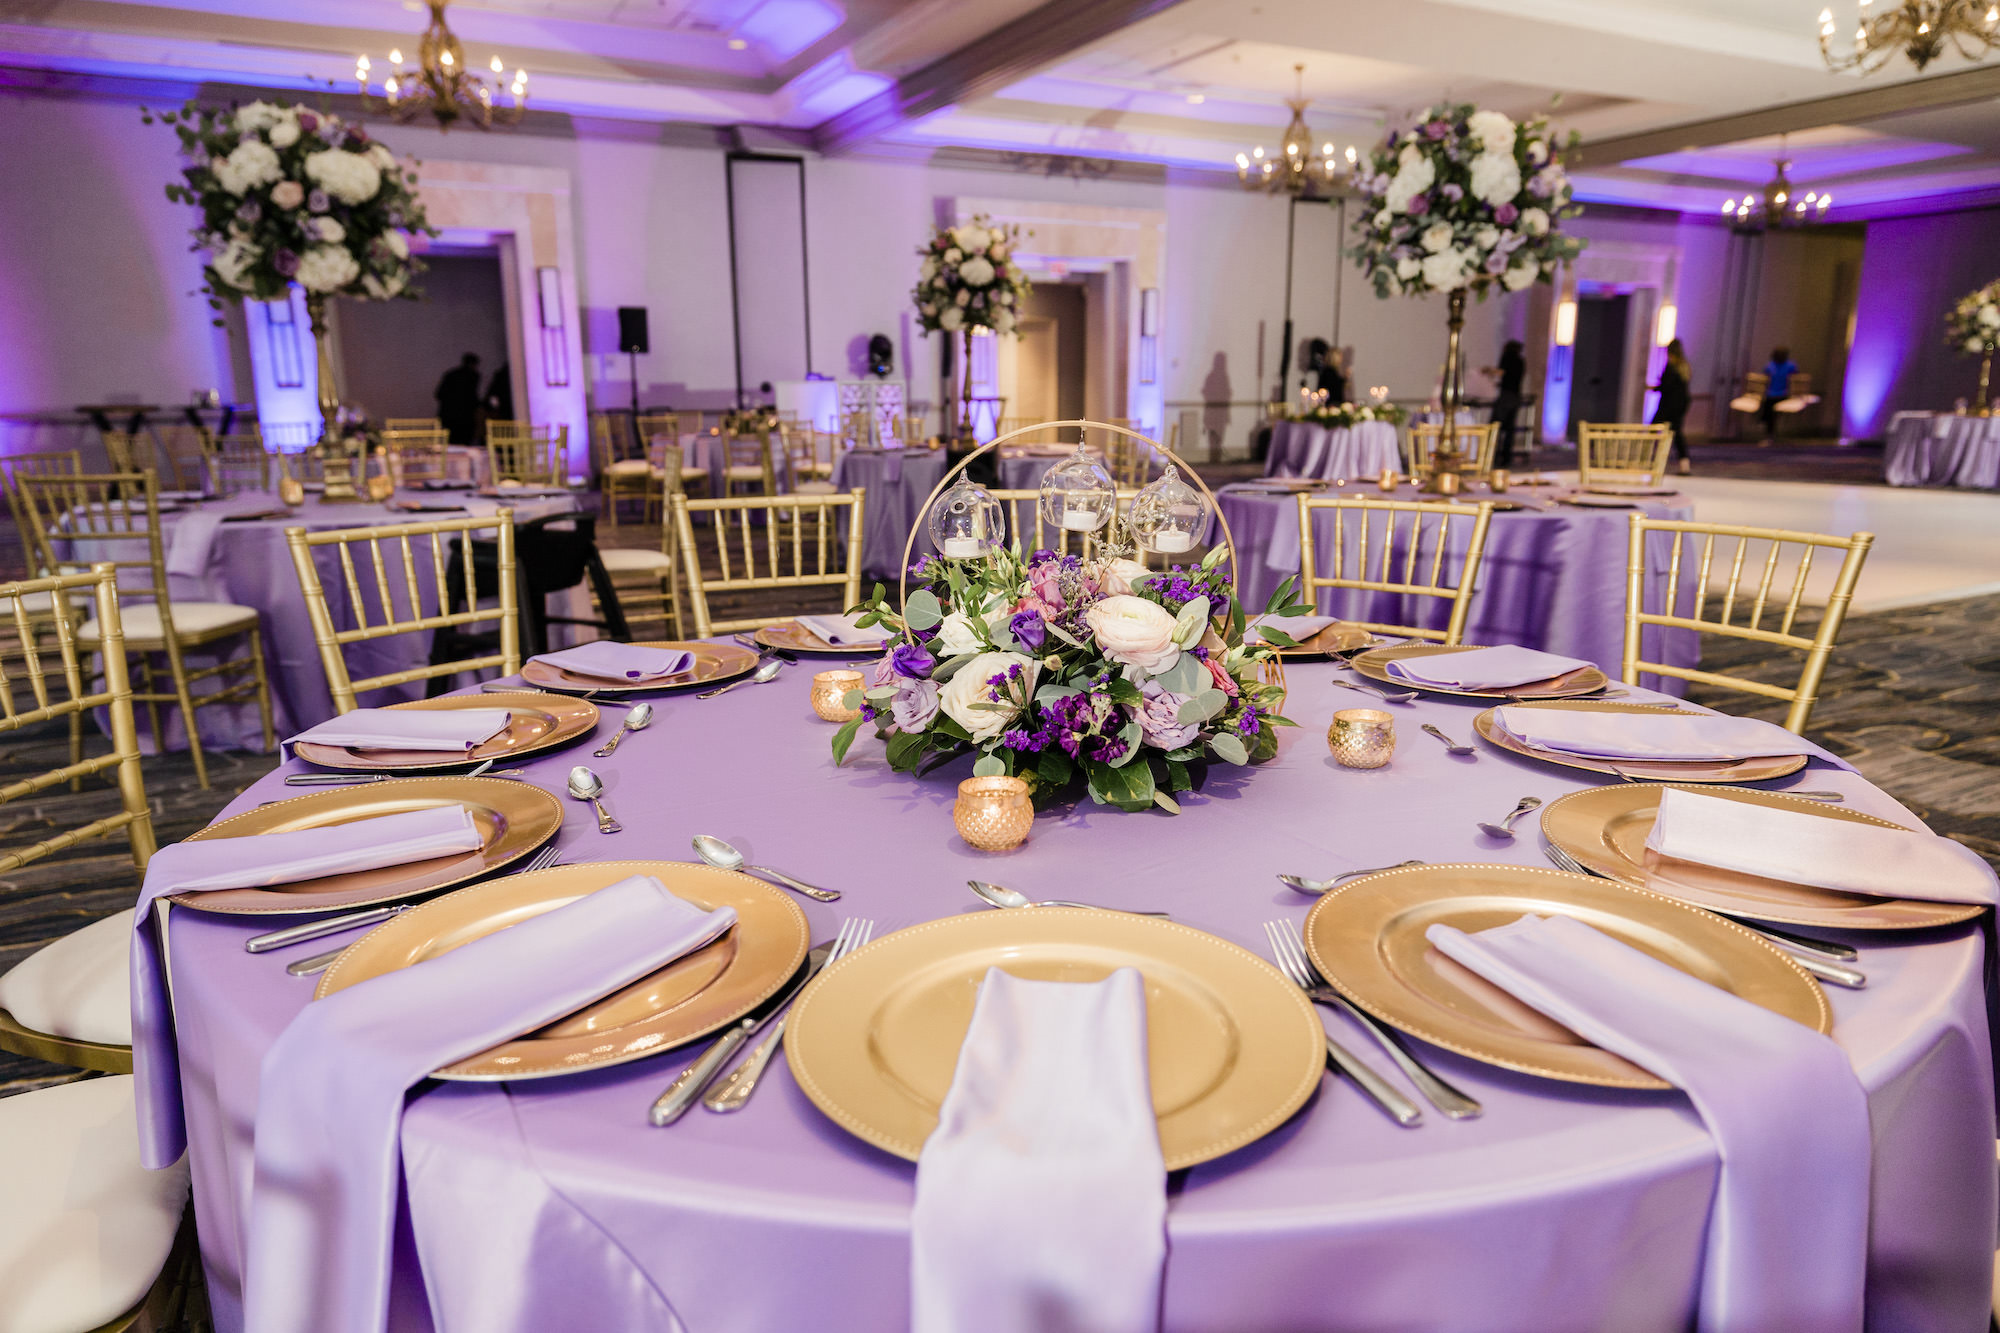 Gold Chargers with Lavender Satin Tablecloth and Napkin Linen | Silver Flatware | Round Arch with Violet, Pink, and White Flowers with Greenery Centerpiece Inspiration | Tampa Bay Rentals Gabro Event Services